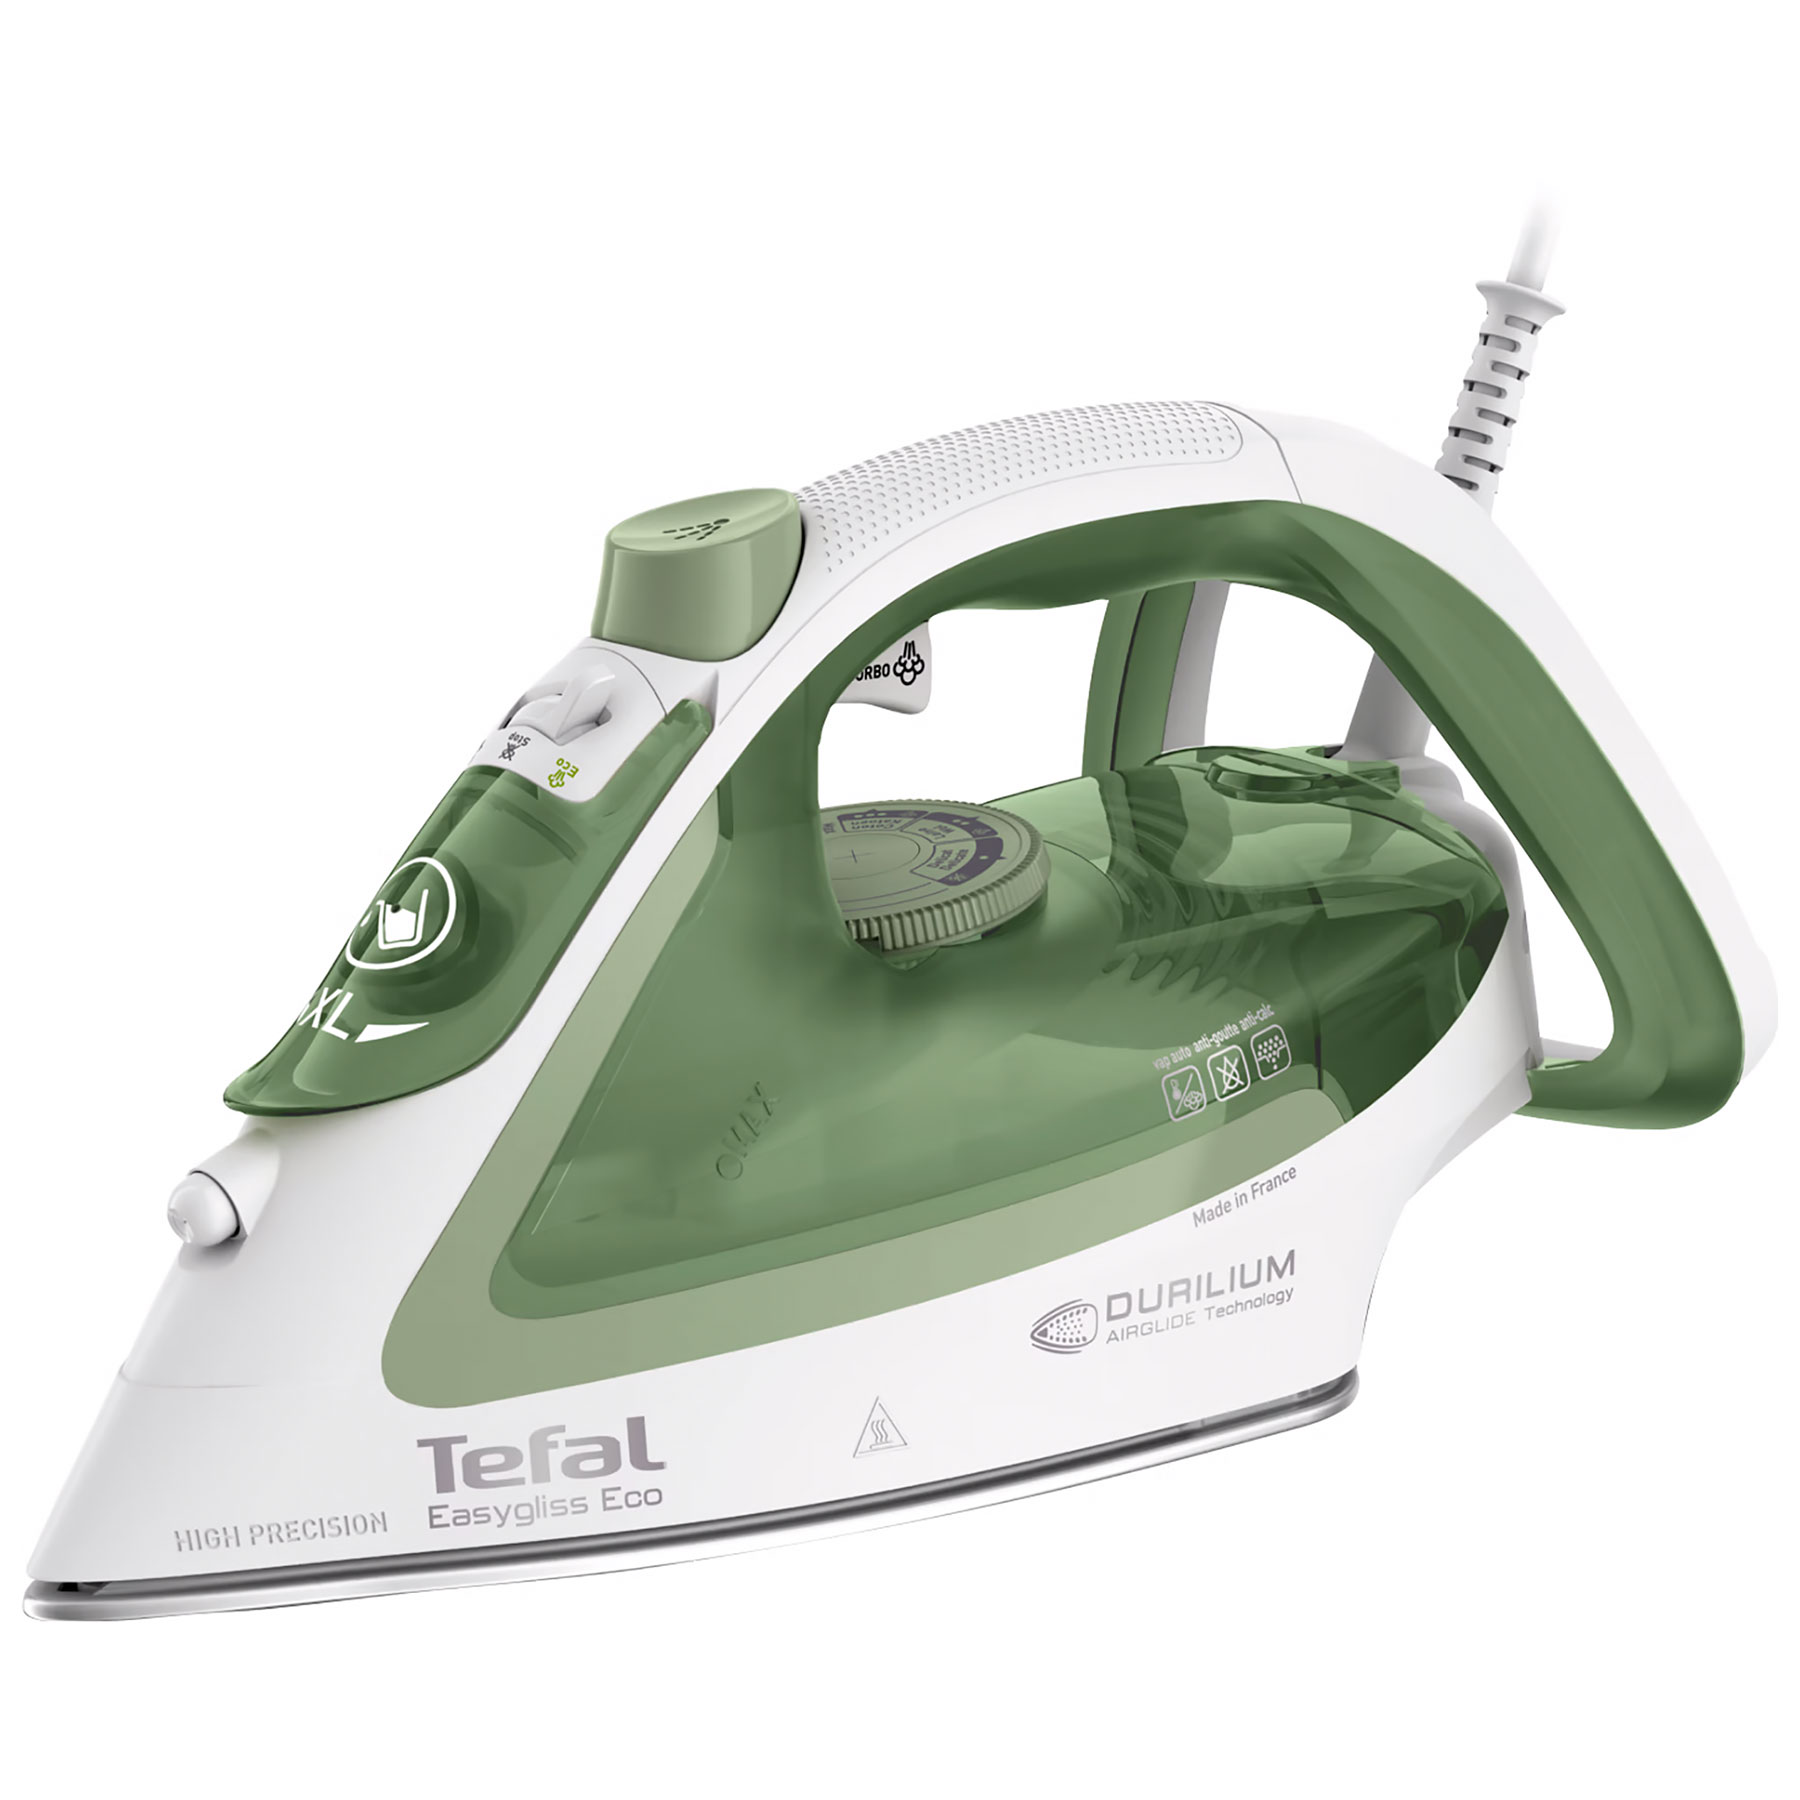 Image of Tefal FV5781G0 Easygliss Eco Steam Iron in White and Green 2800W